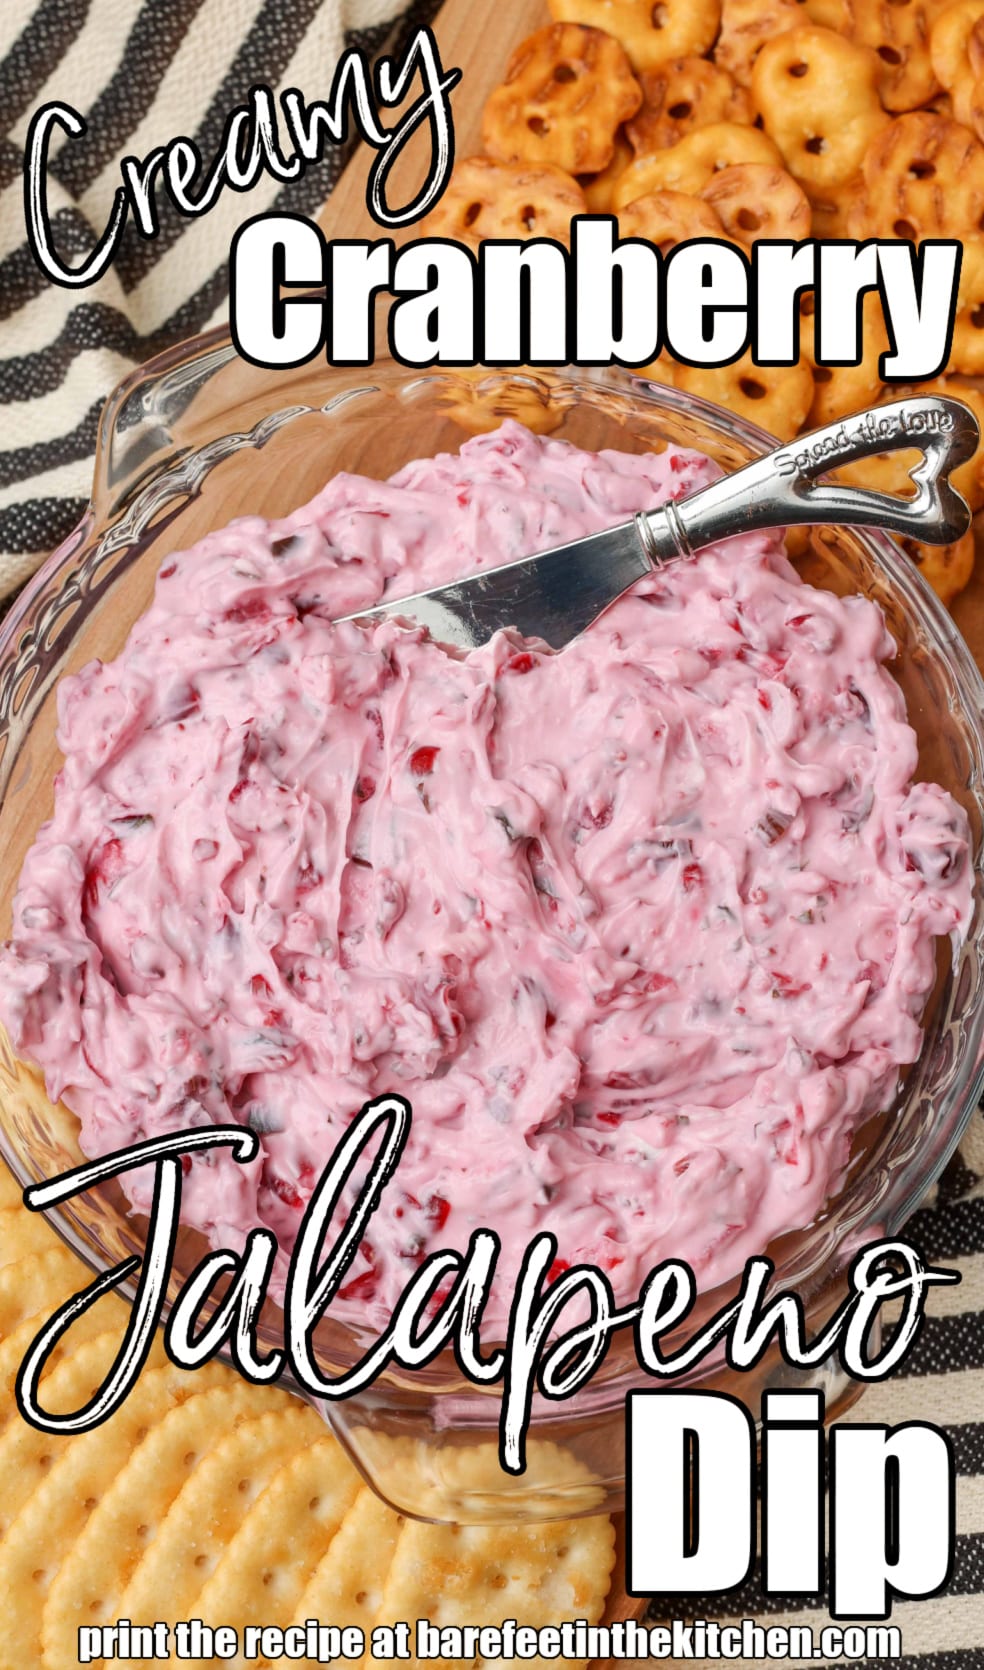 Creamy Cranberry Dip – Barefeet in the Kitchen